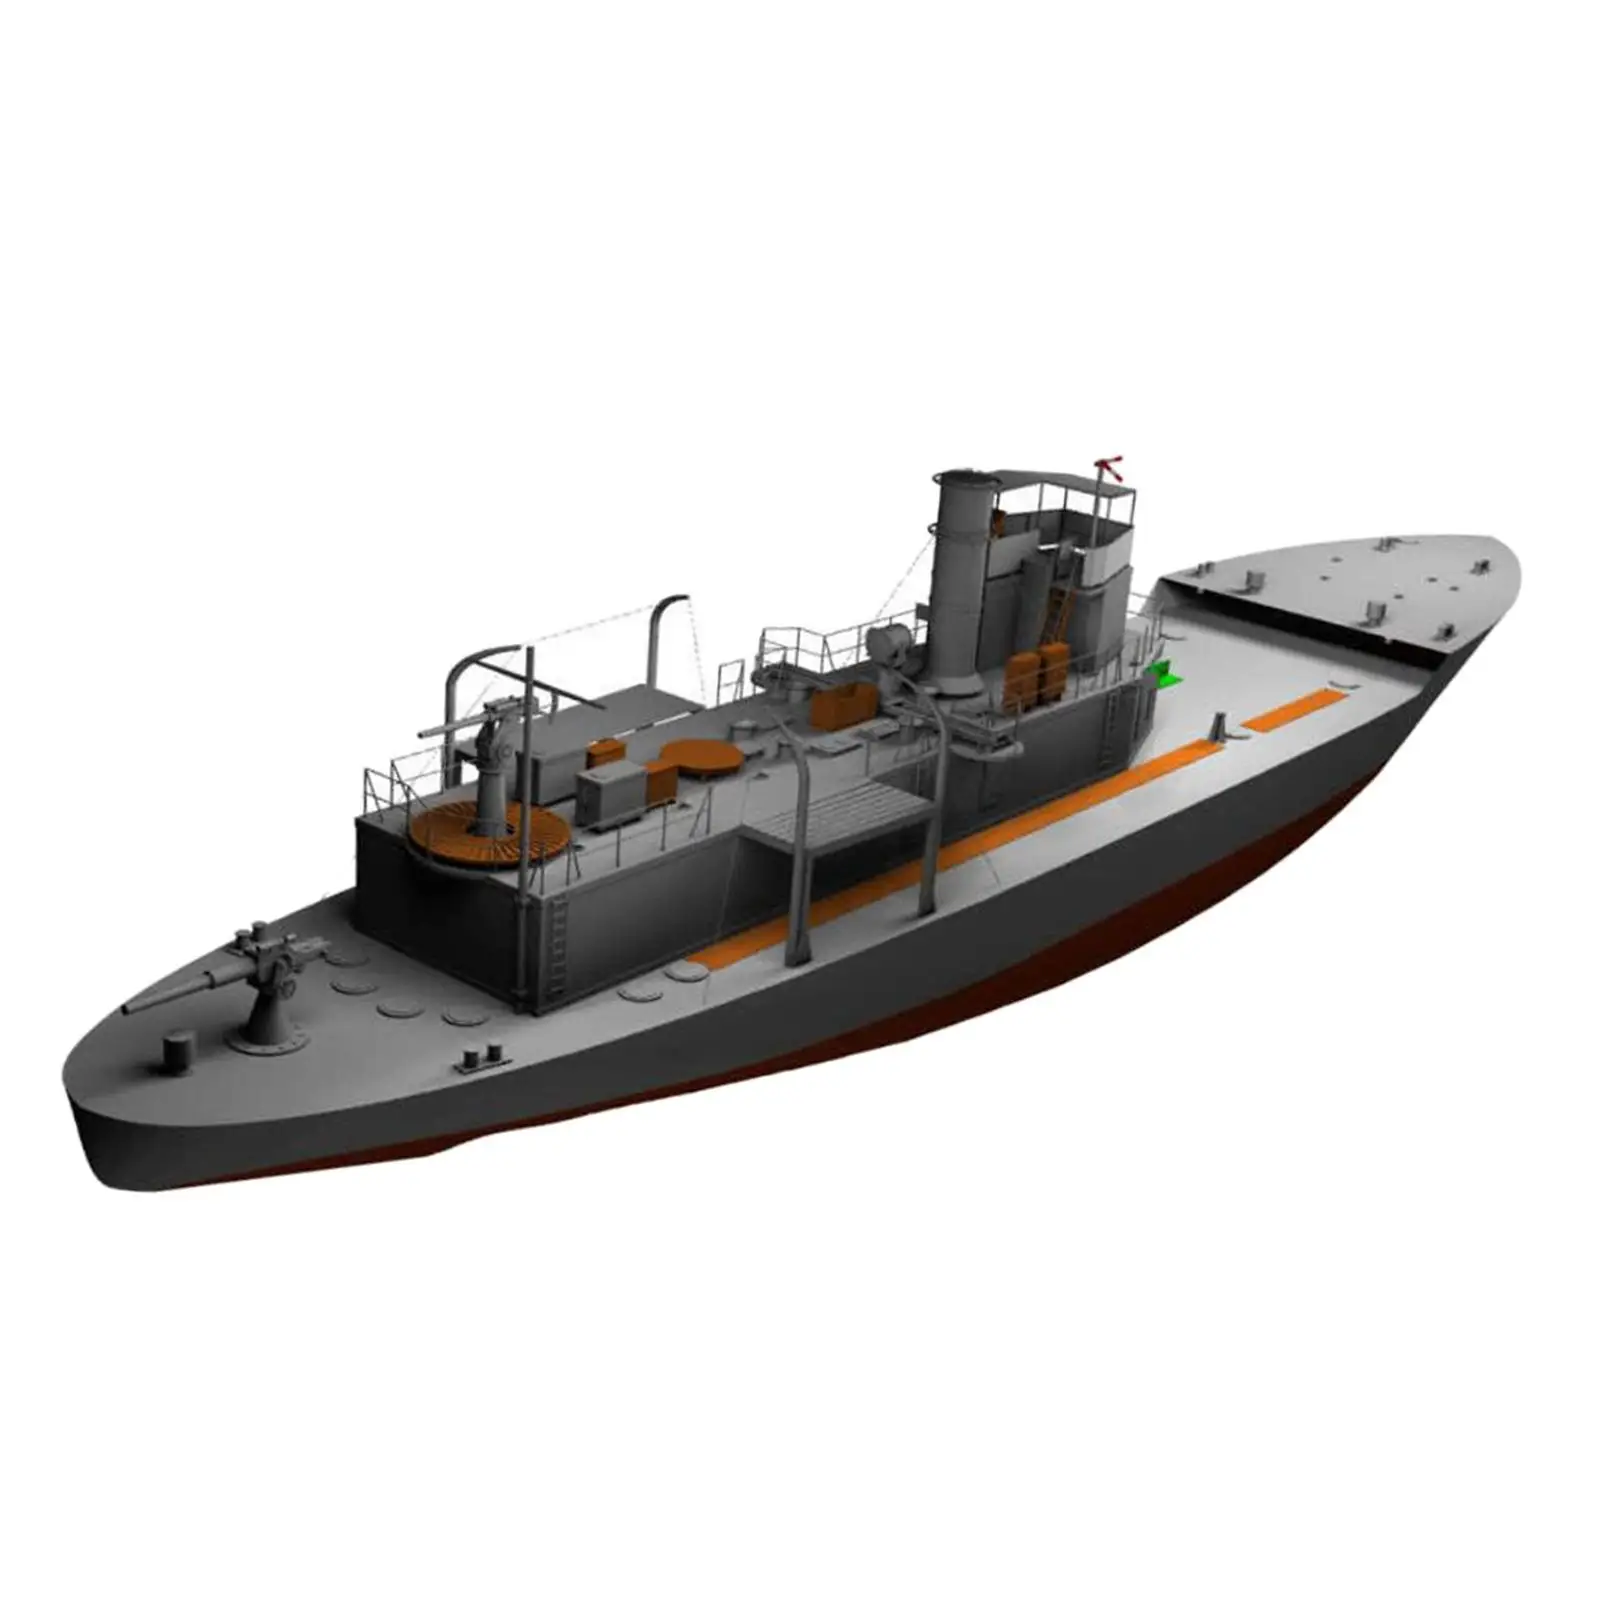 1:100 Scale Ship and Boat Jigsaw Puzzles Patrol Boat Scale Model Patrol Boat Kits for Kids